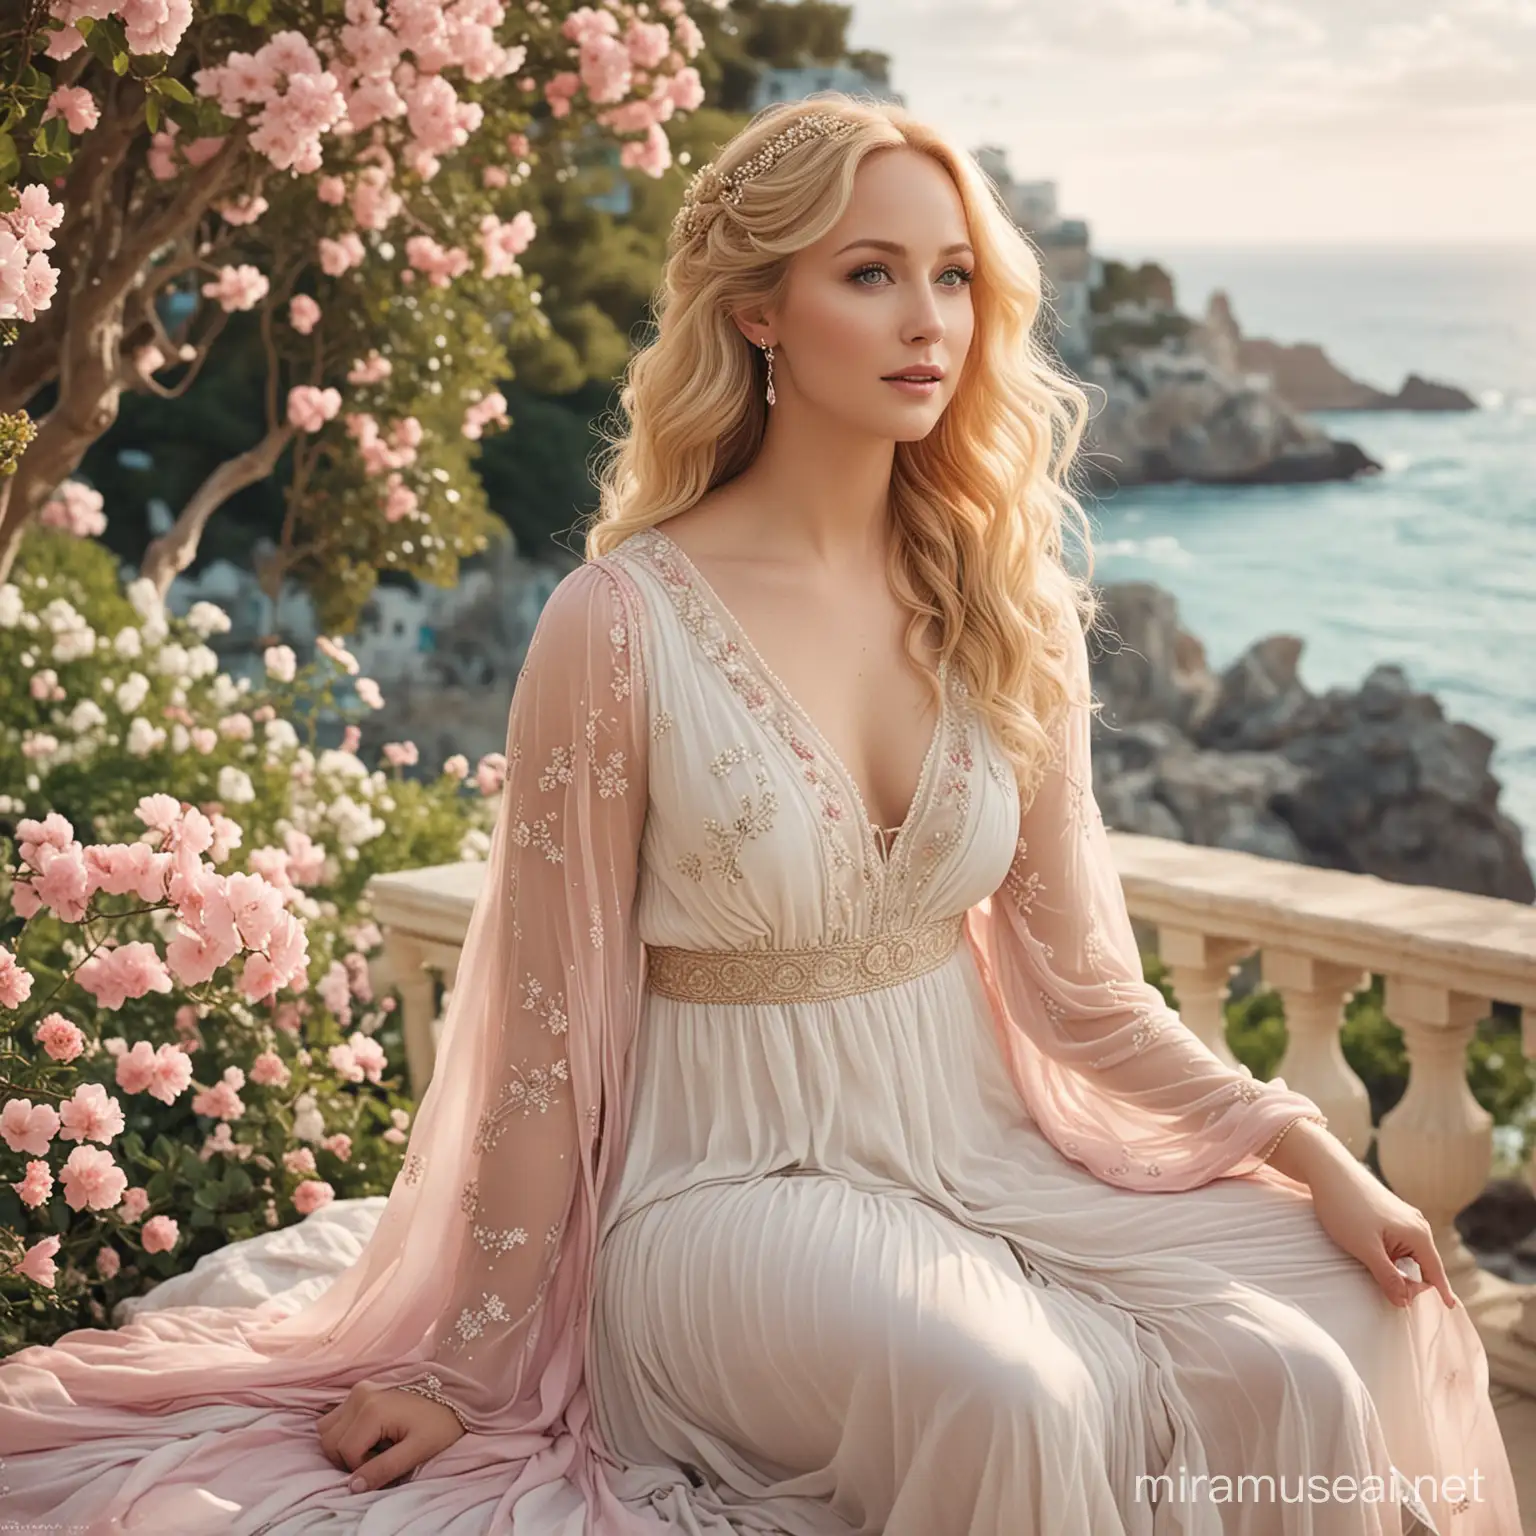 A masterpieced of Candice Accola as Ariadne, Greek goddess of Greek Mythology. She is sitting in a blooming garden of Greek style with sea views. Her hair flows in the air. She wears a Greek dress in soft pastel colors that flow around her is dreamy and ethereal.